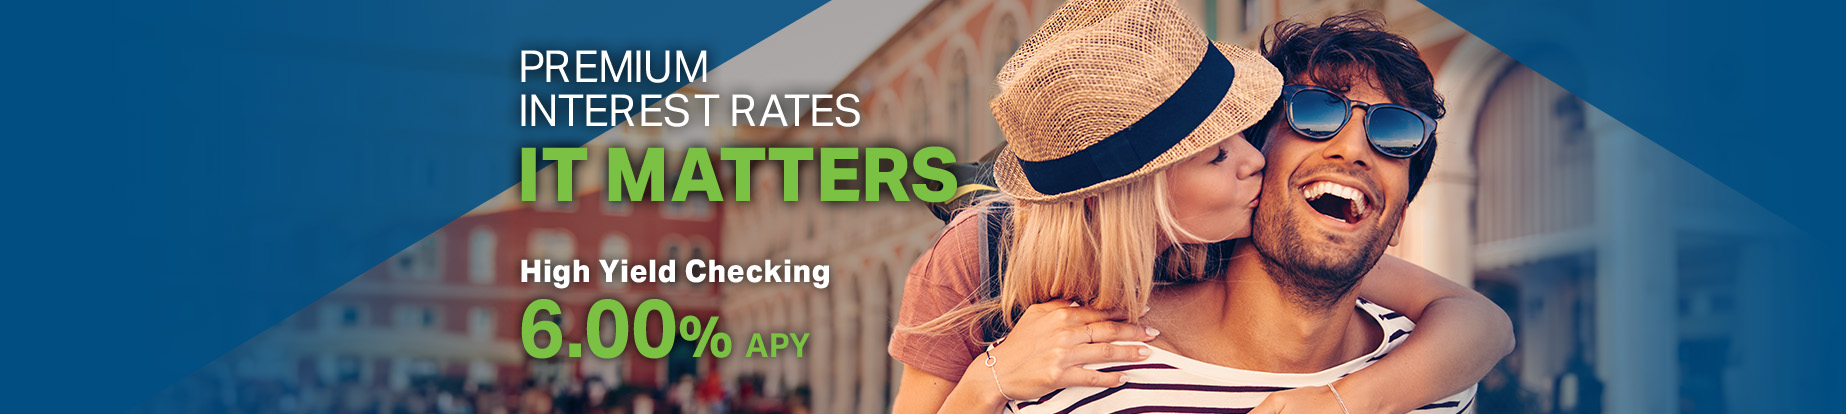 Premium Interest Rates, It Matters. High Yield Checking 6.00% APY